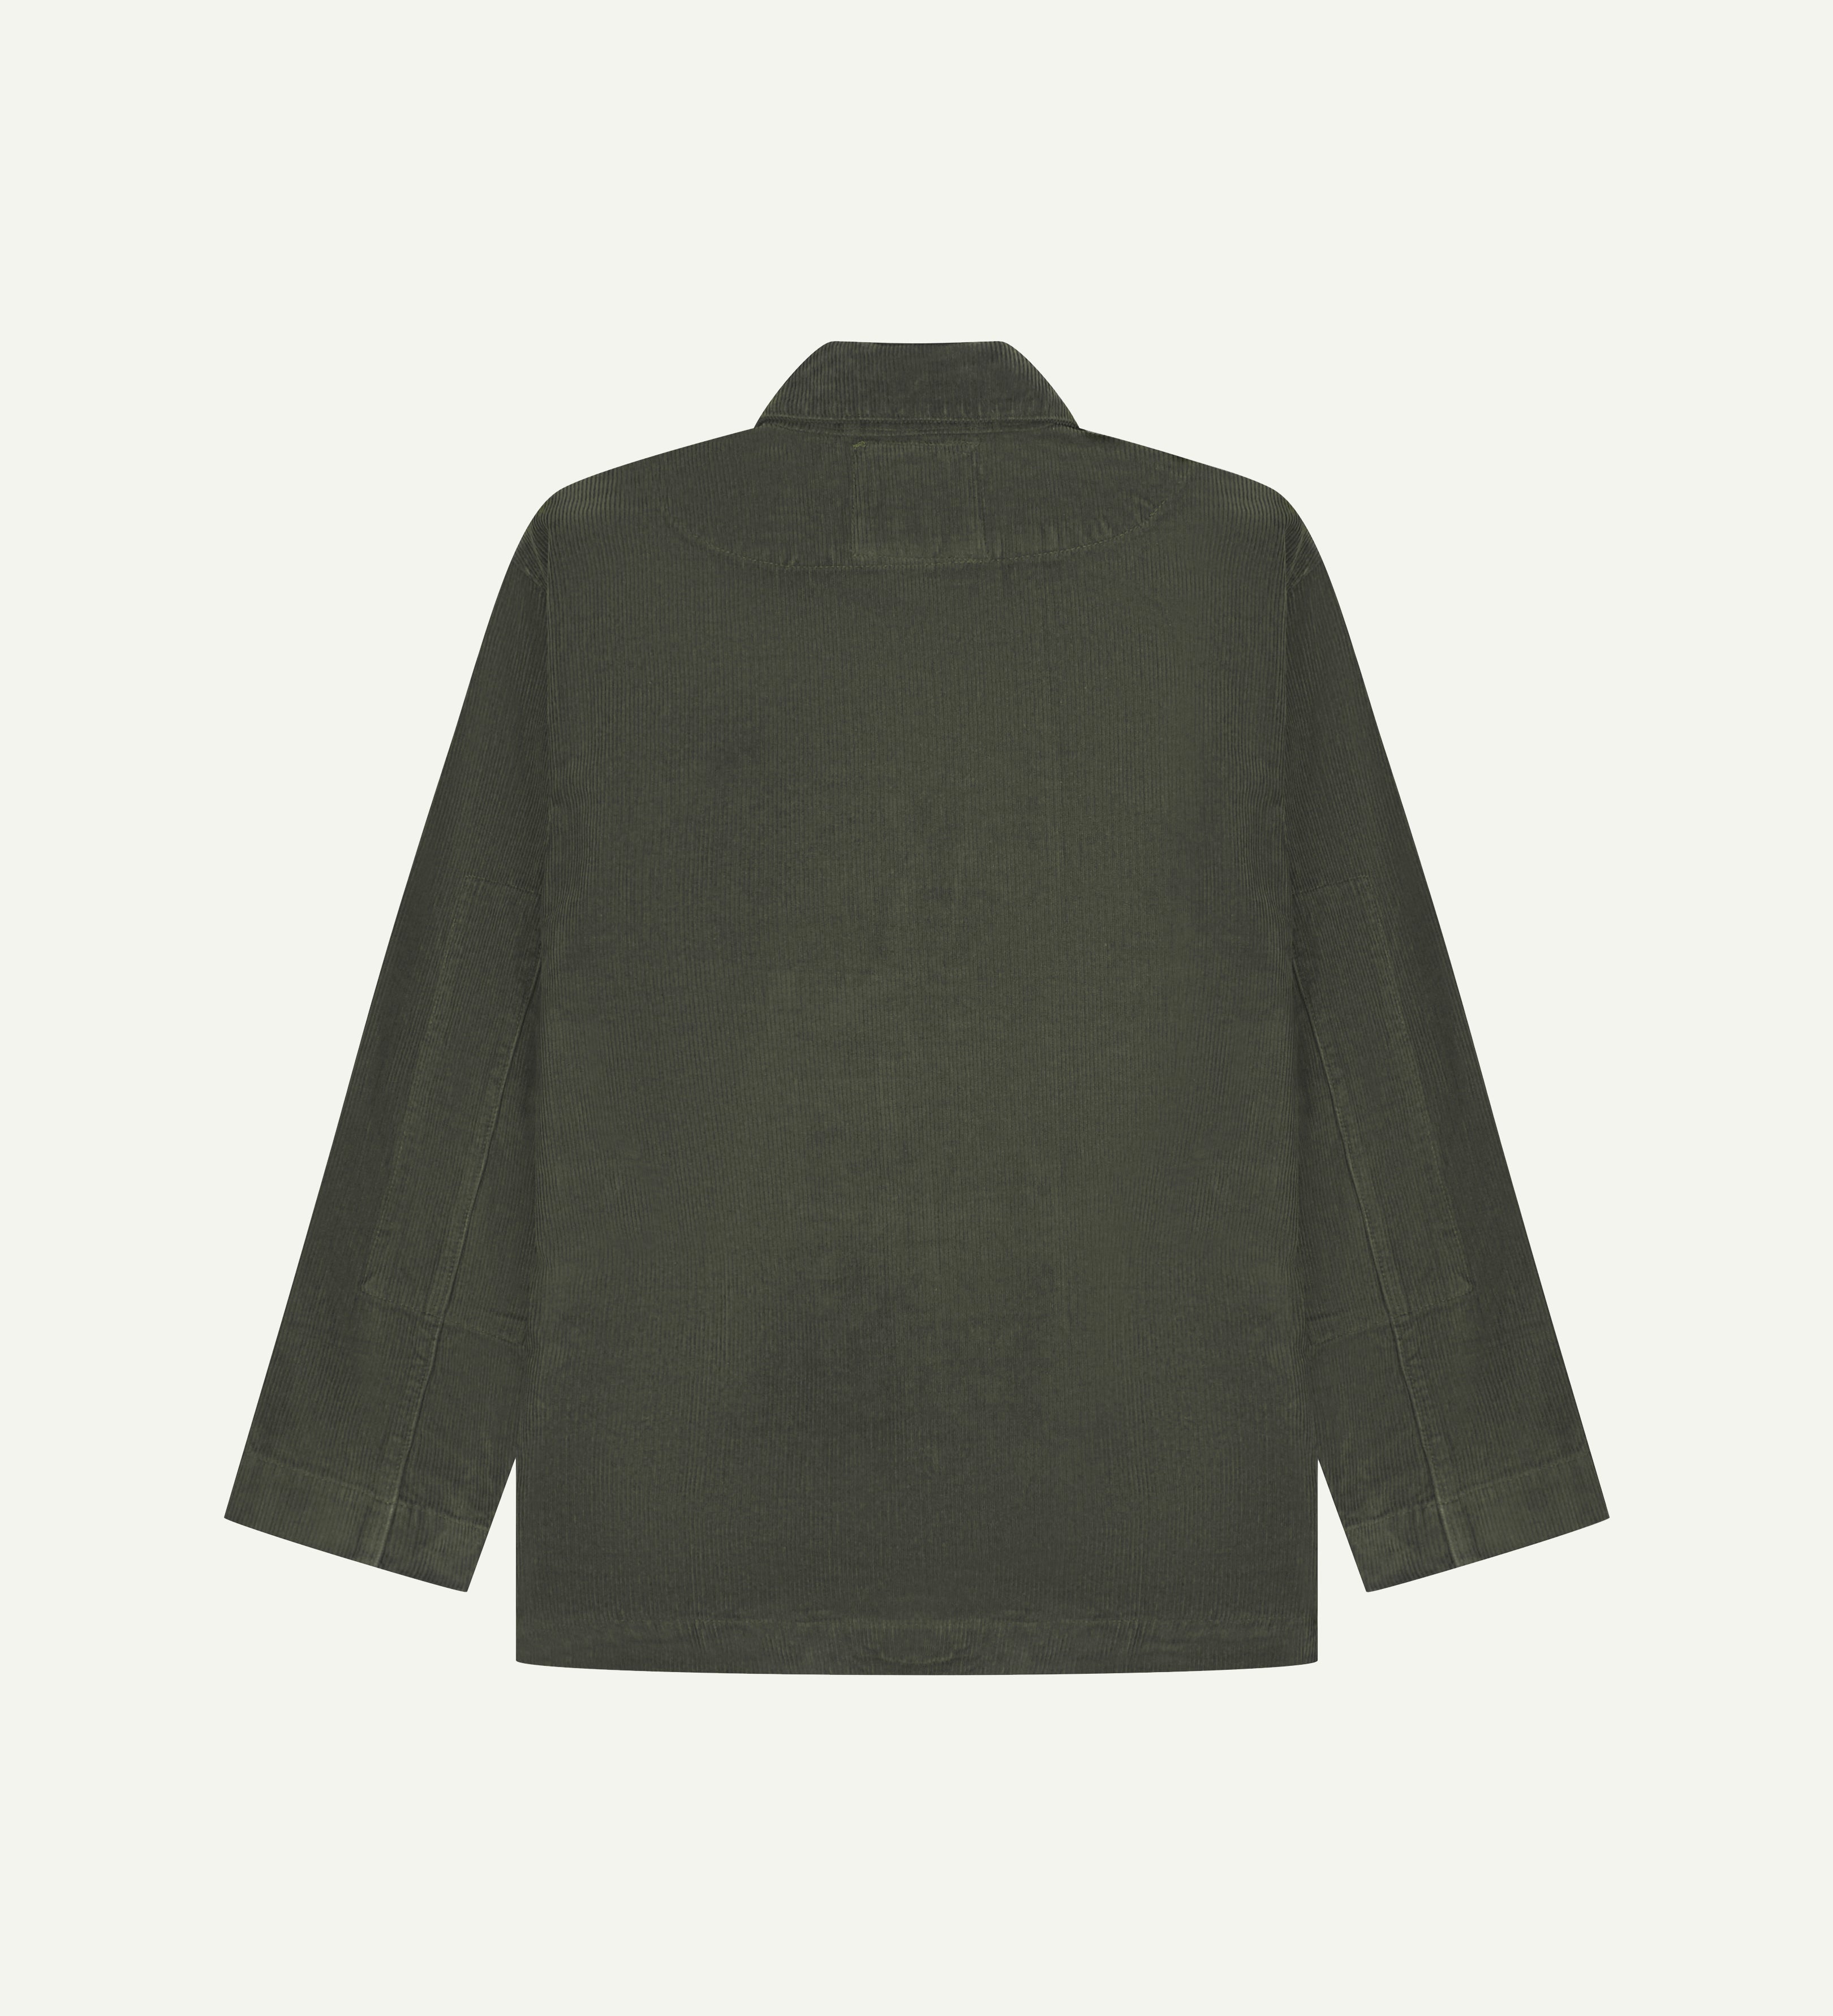 Back view of the #3006 uskees dark green corduroy men's jacket.